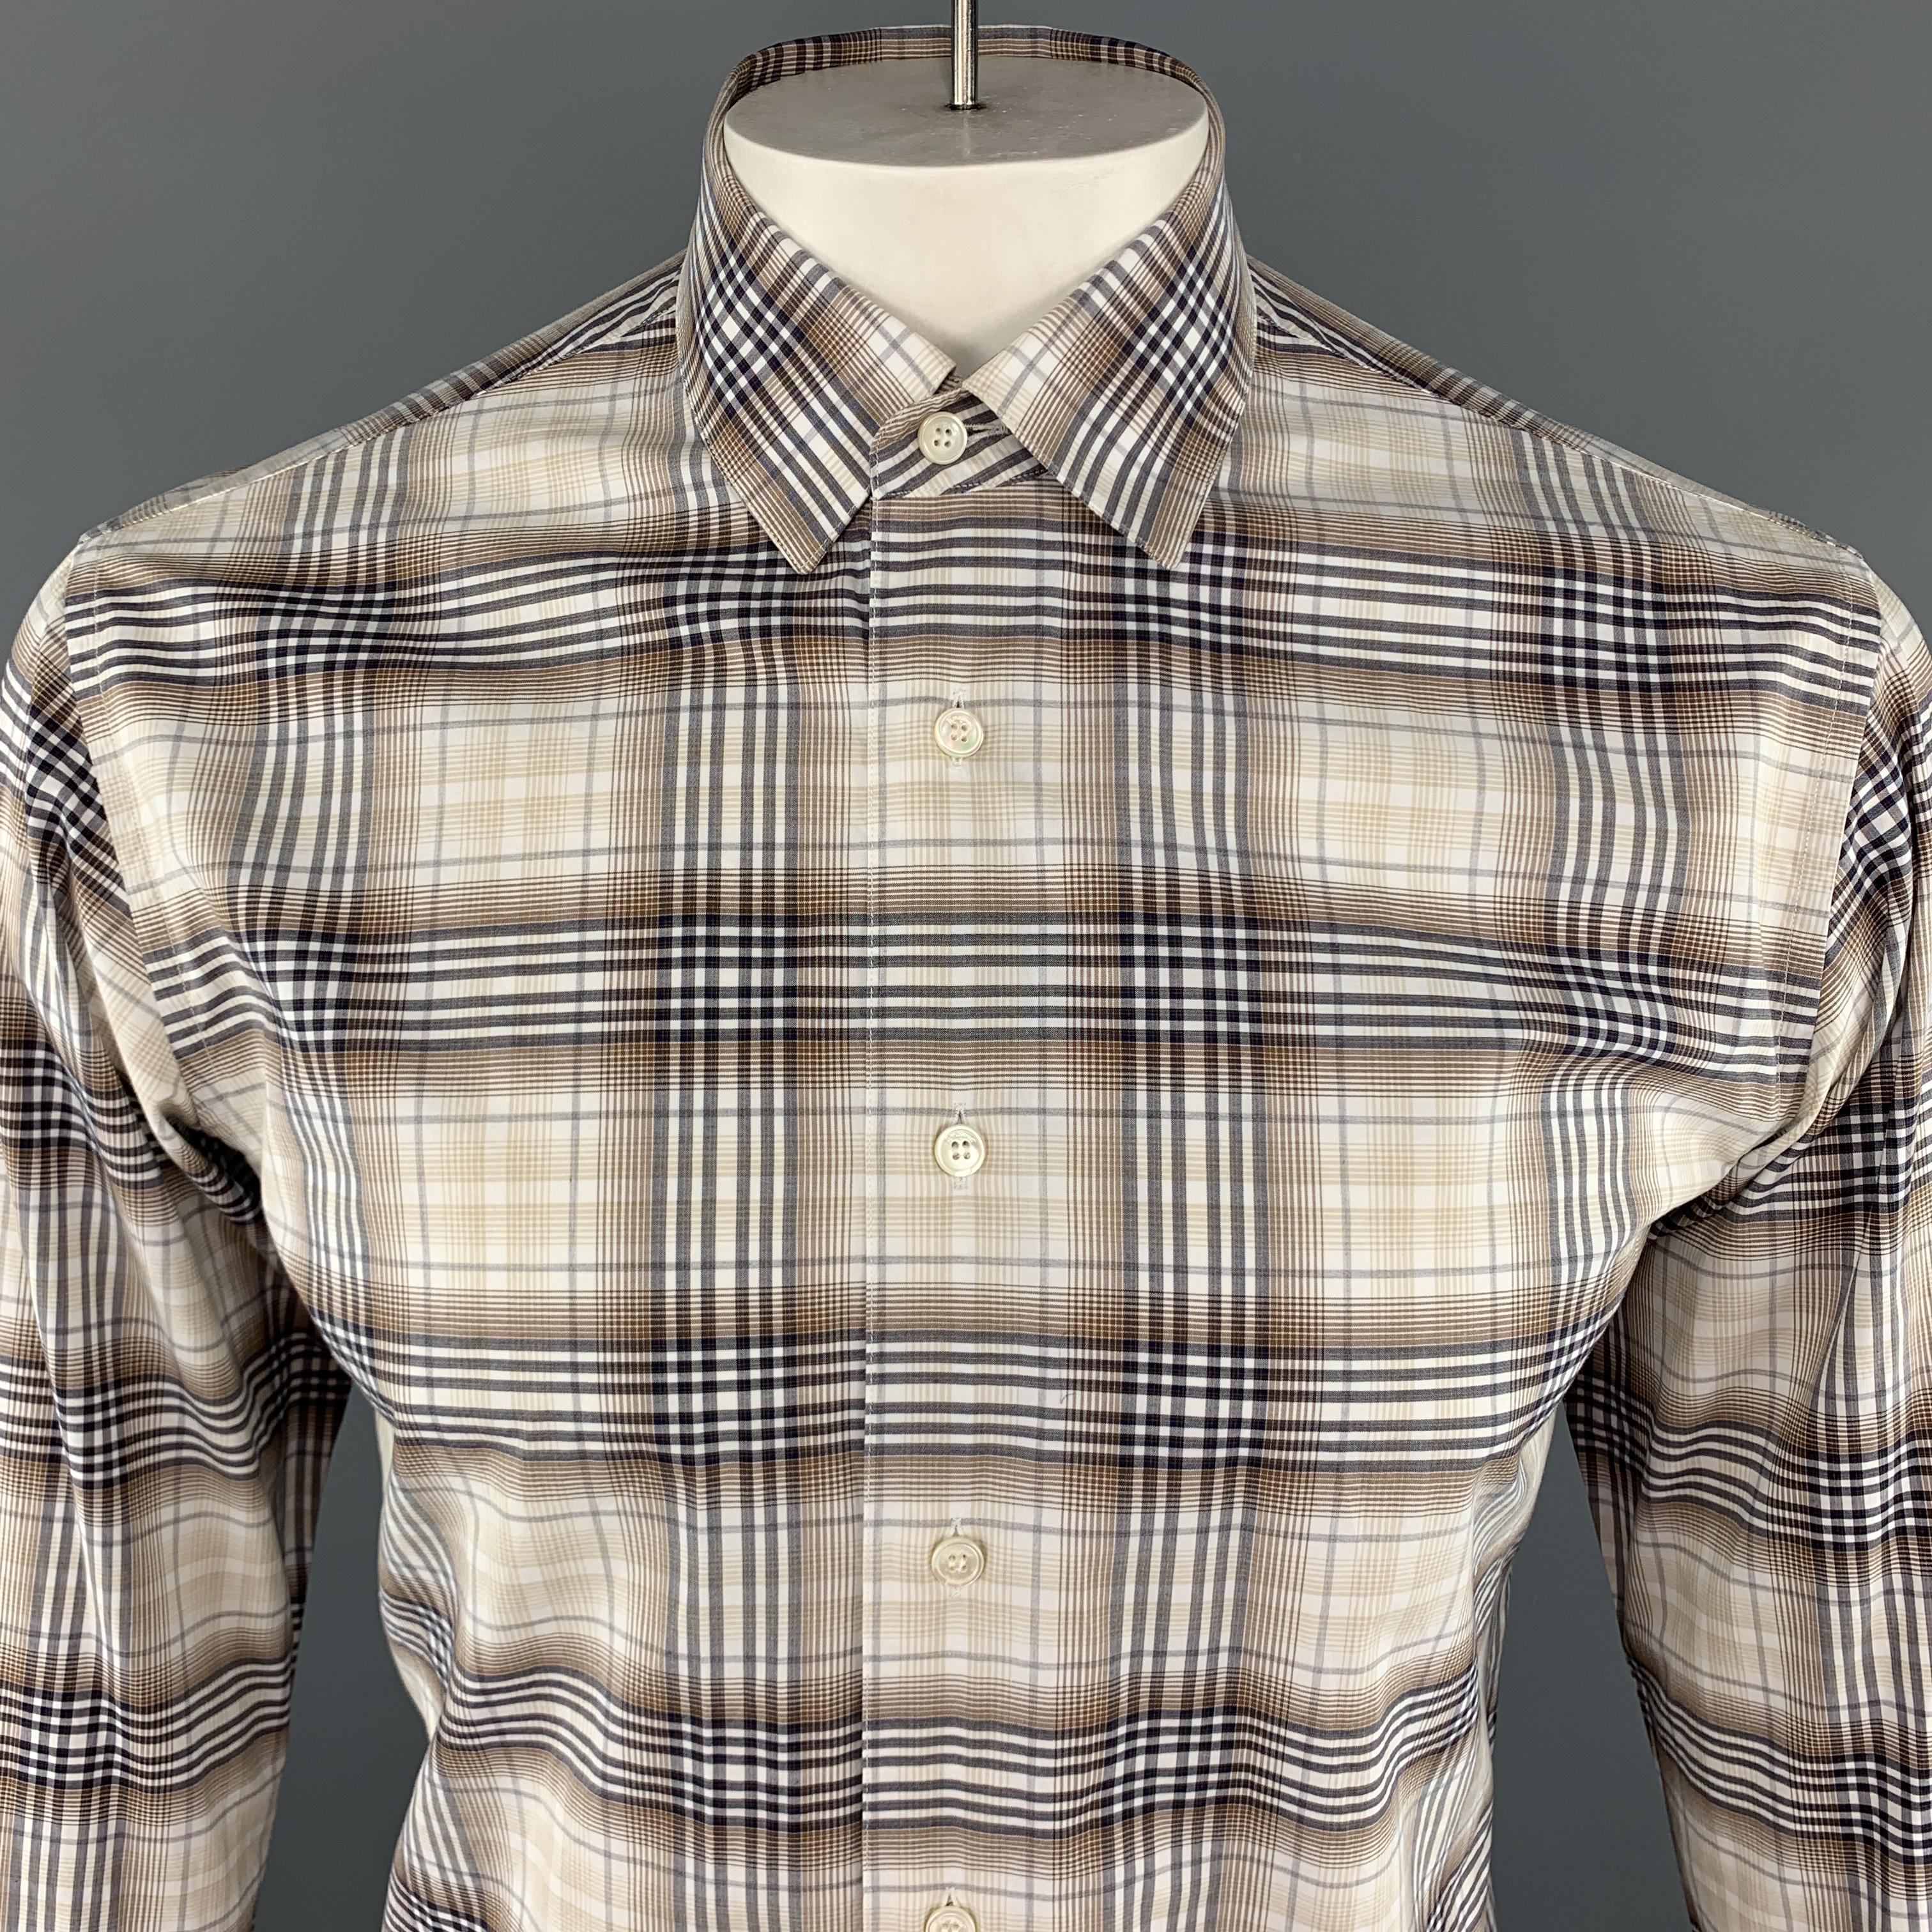 SALVATORE FERRAGAMO Long Sleeve Shirt comes in brown tones in a plaid cotton material, with a classic collar, buttoned cuffs, button up. Made in Italy.

Excellent Pre-Owned Condition.
Marked: M

Measurements:

Shoulder: 17 in. 
Chest: 44 in.